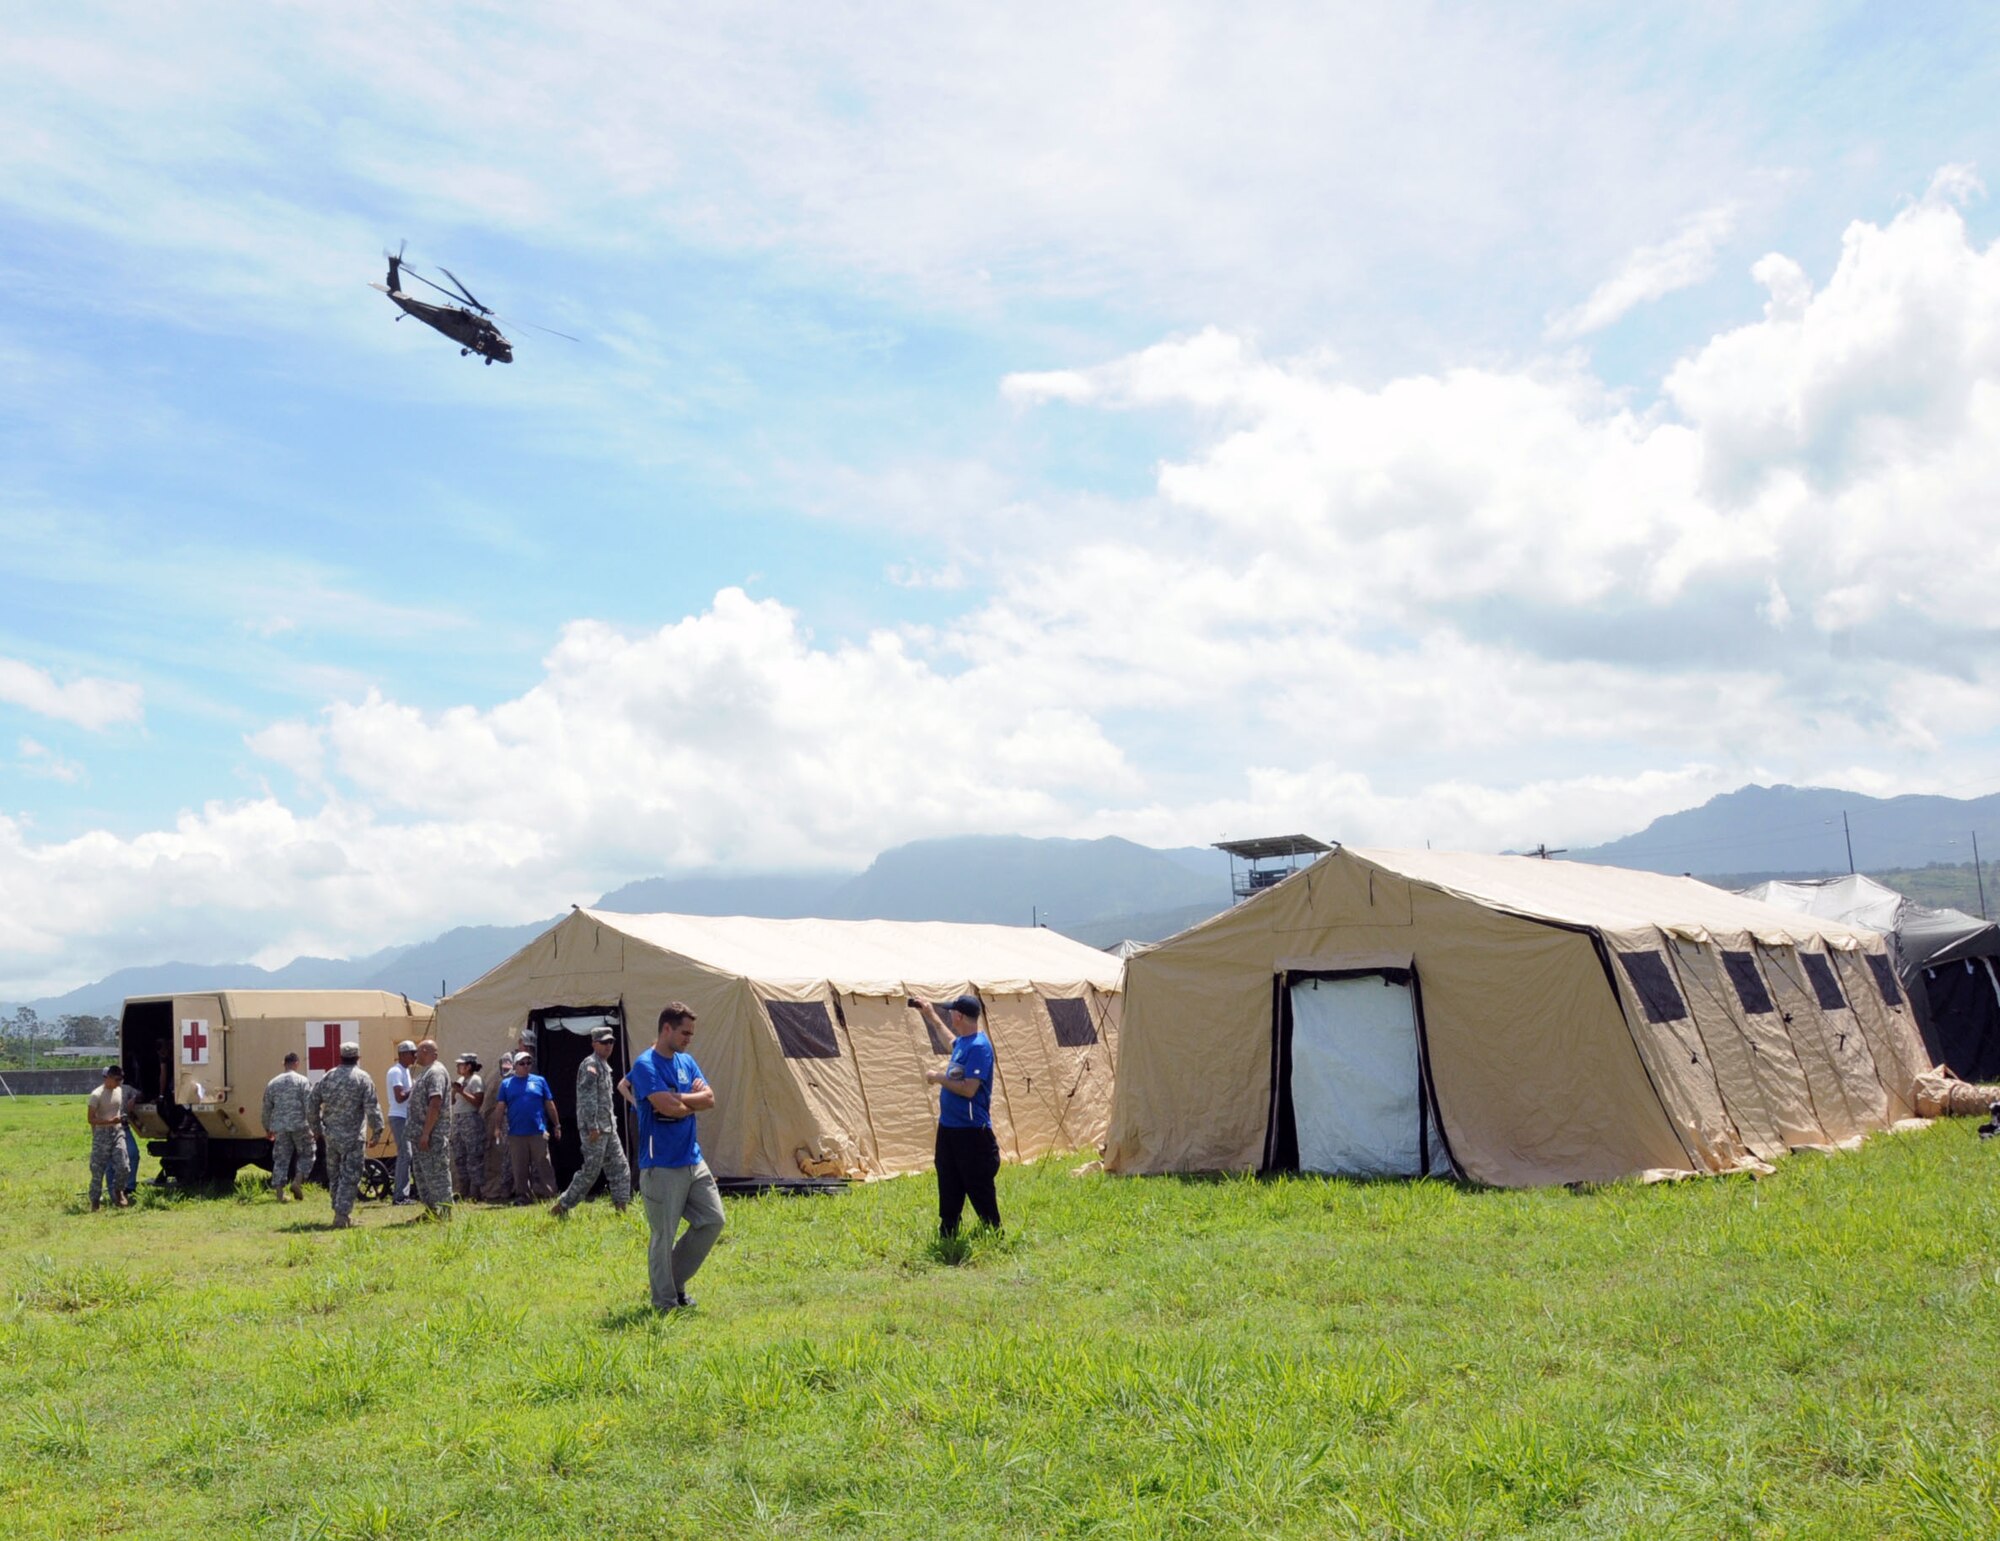 A UH-60 Blackhawk MEDEVAC helicopter takes off in simulated patient air evacuation during a exercise at Soto Cano Air Base, Honduras.  In preparation for the 2014 hurricane season, the Joint Task Force-Bravo Medical Element (MEDEL) conducted a humanitarian assistance/disaster response (HA/DR) exercise at Soto Cano Air Base June 12, 2014.  The MEDEL's mission was to establish a forward medical treatment operation capable of providing triage, primary care, surgical capabilities, patient holding and evacuation.  As part of this exercise, a suite of mobile technology applications that run on smartphones and tablets were used to enhance the capabilities of the unit: Global MedAid, Medical Application of Speech Translation (MAST) and GeoSHAPE.  (Photo by U. S. Air National Guard Capt. Steven Stubbs)